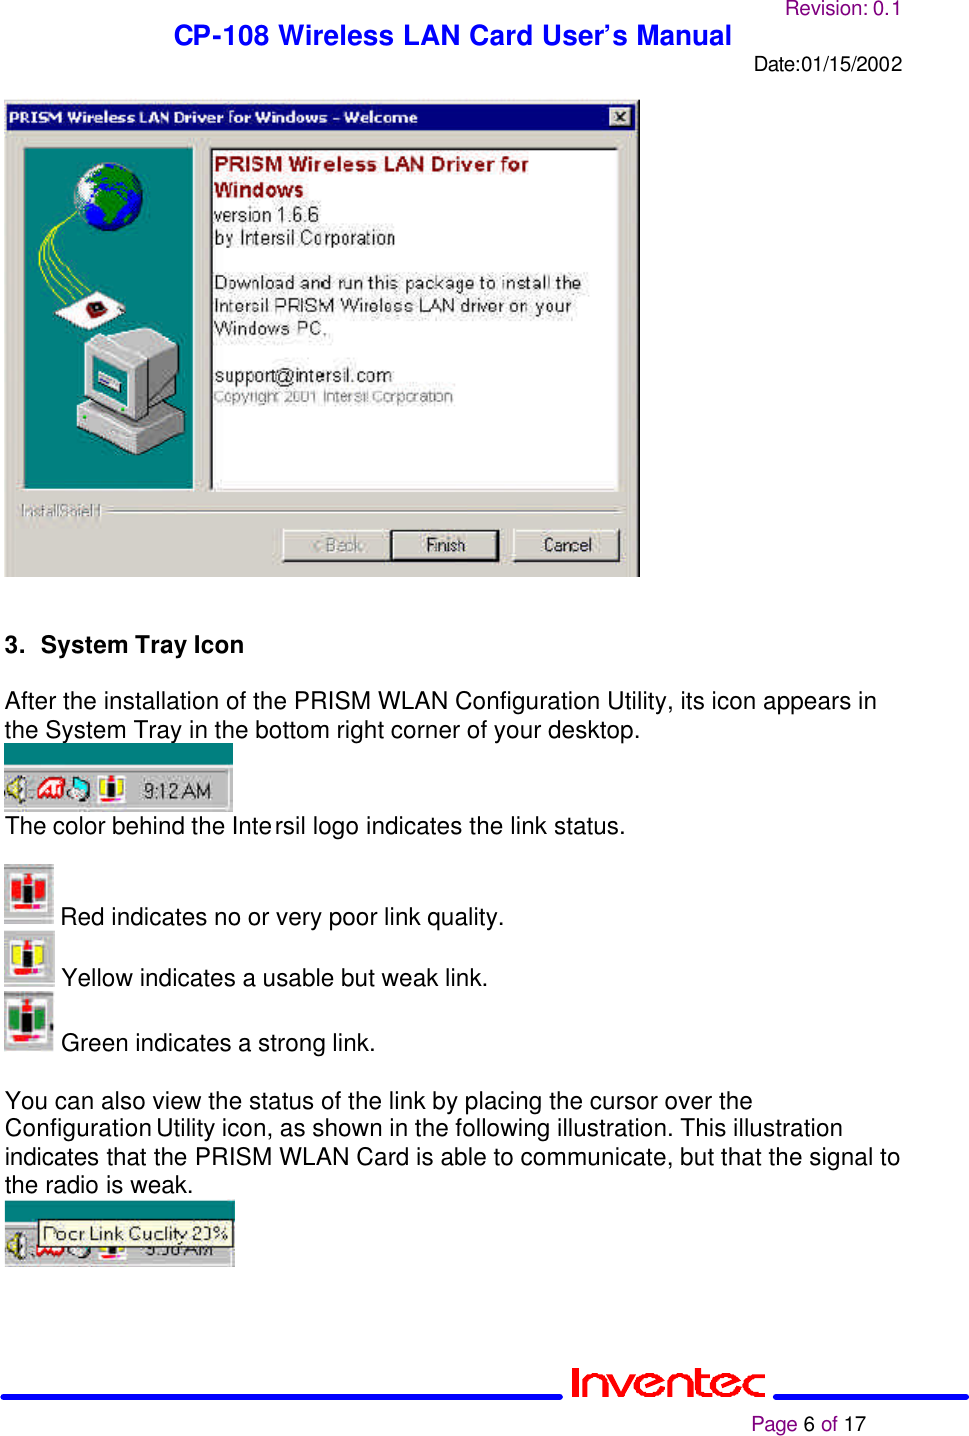 Revision: 0.1 CP-108 Wireless LAN Card User’s Manual Date:01/15/2002                                                                                                                                                             Page 6 of 17     3. System Tray Icon  After the installation of the PRISM WLAN Configuration Utility, its icon appears in the System Tray in the bottom right corner of your desktop.   The color behind the Intersil logo indicates the link status.   Red indicates no or very poor link quality.  Yellow indicates a usable but weak link.  Green indicates a strong link.  You can also view the status of the link by placing the cursor over the Configuration Utility icon, as shown in the following illustration. This illustration indicates that the PRISM WLAN Card is able to communicate, but that the signal to the radio is weak.   